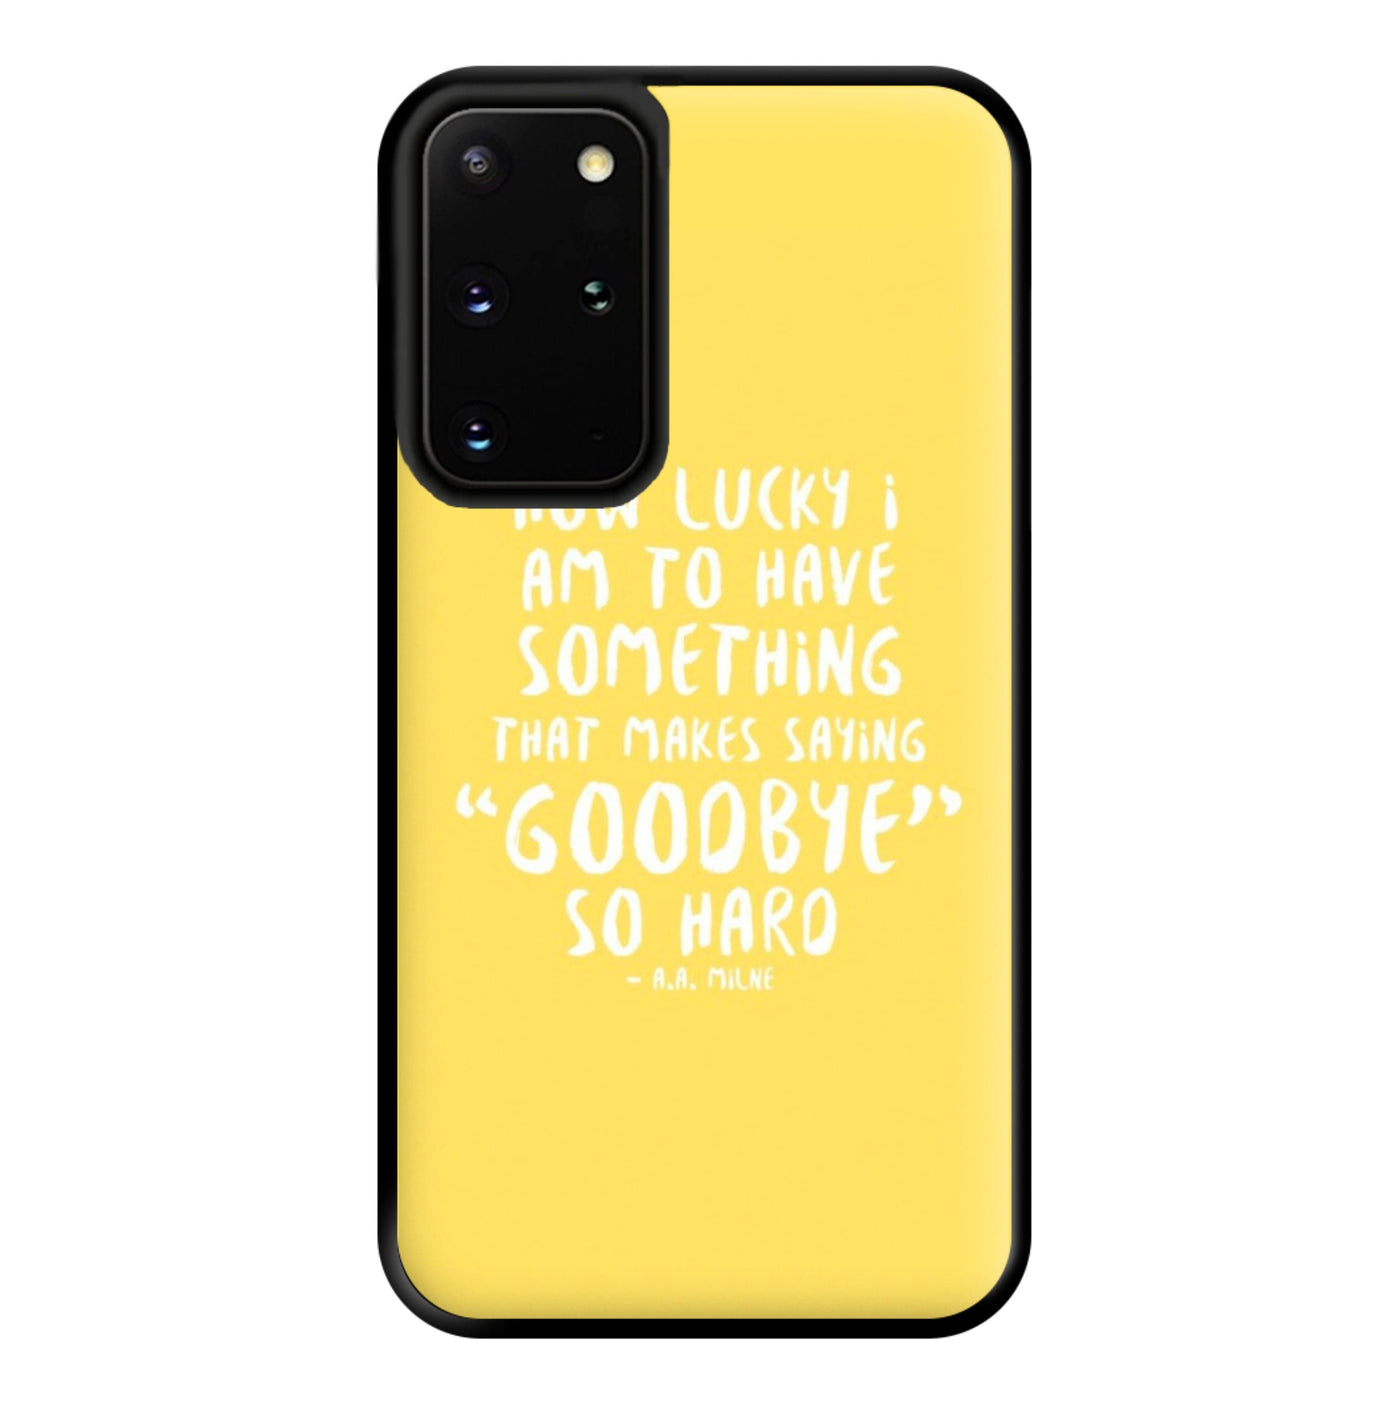 How Lucky I Am - Winnie The Pooh Phone Case